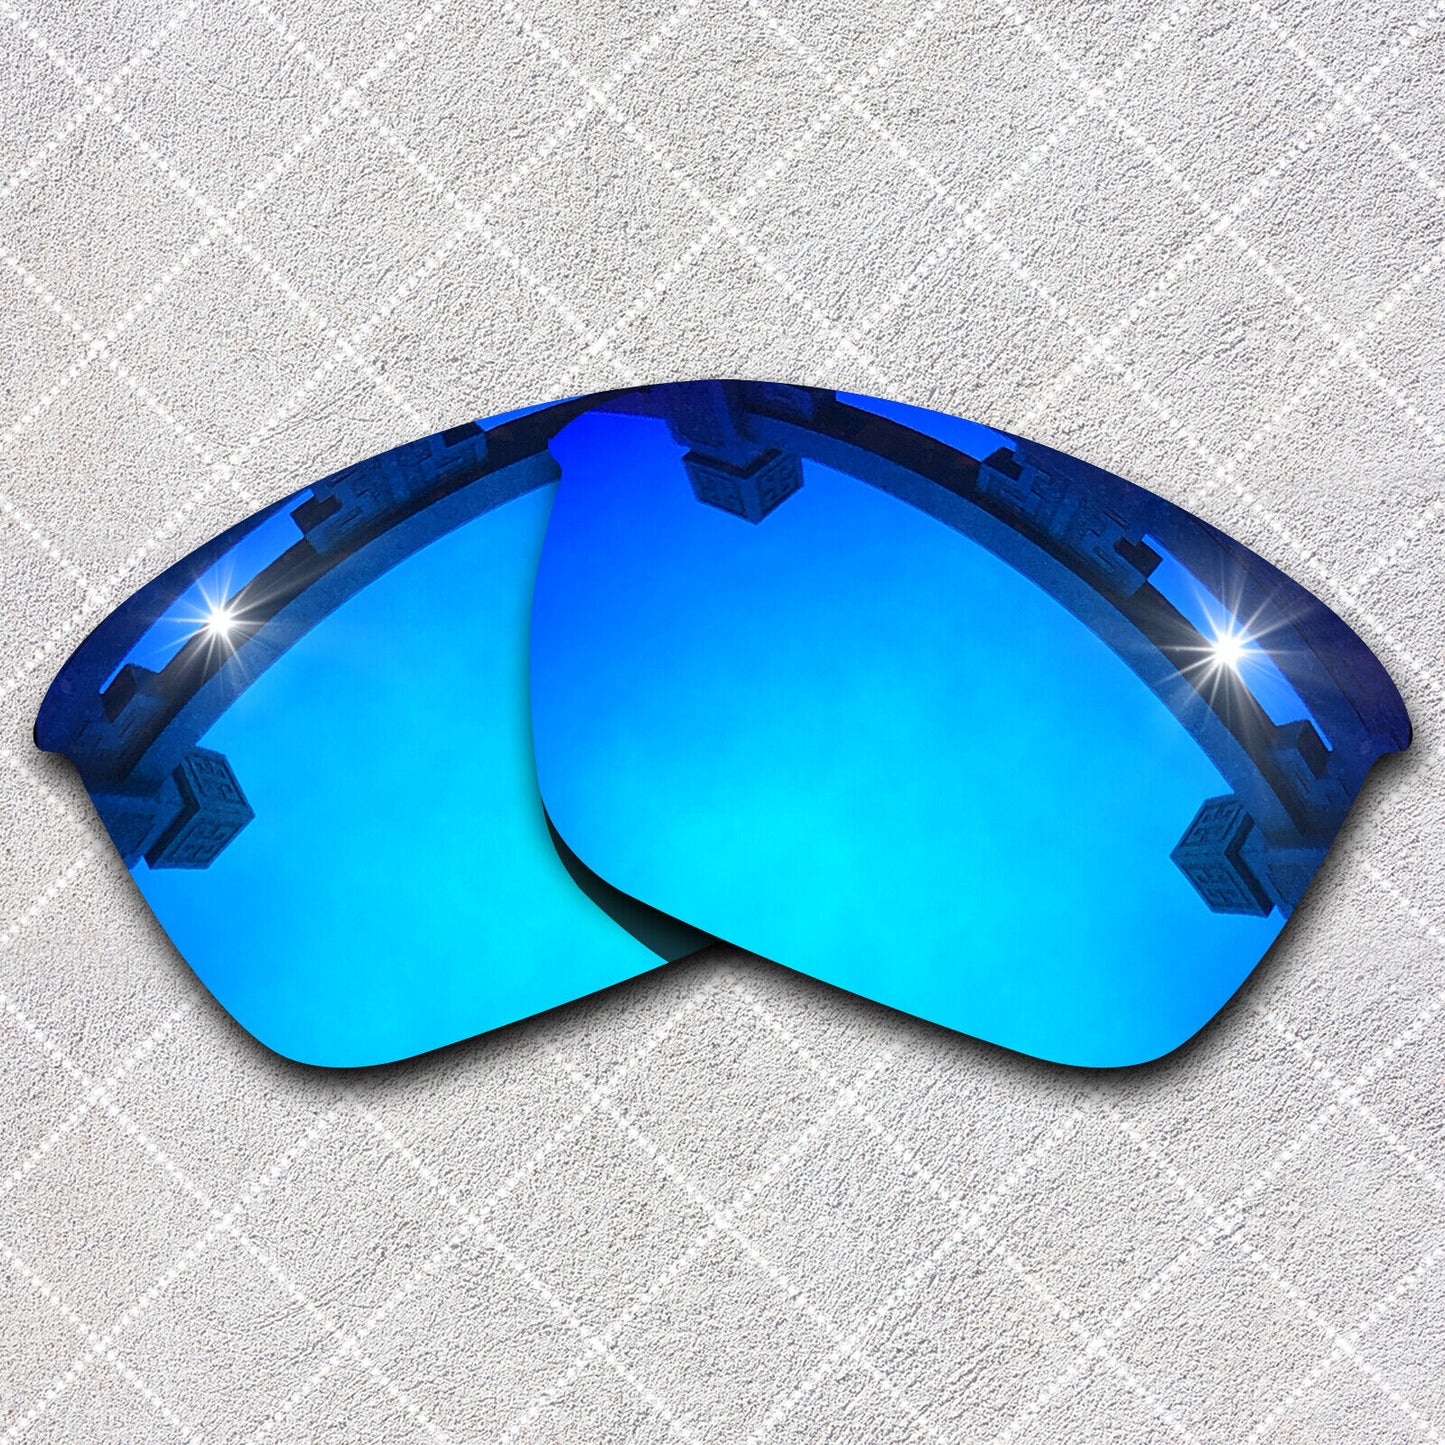 HeyRay Replacement Lenses for Valve Sunglasses Polarized - Opt